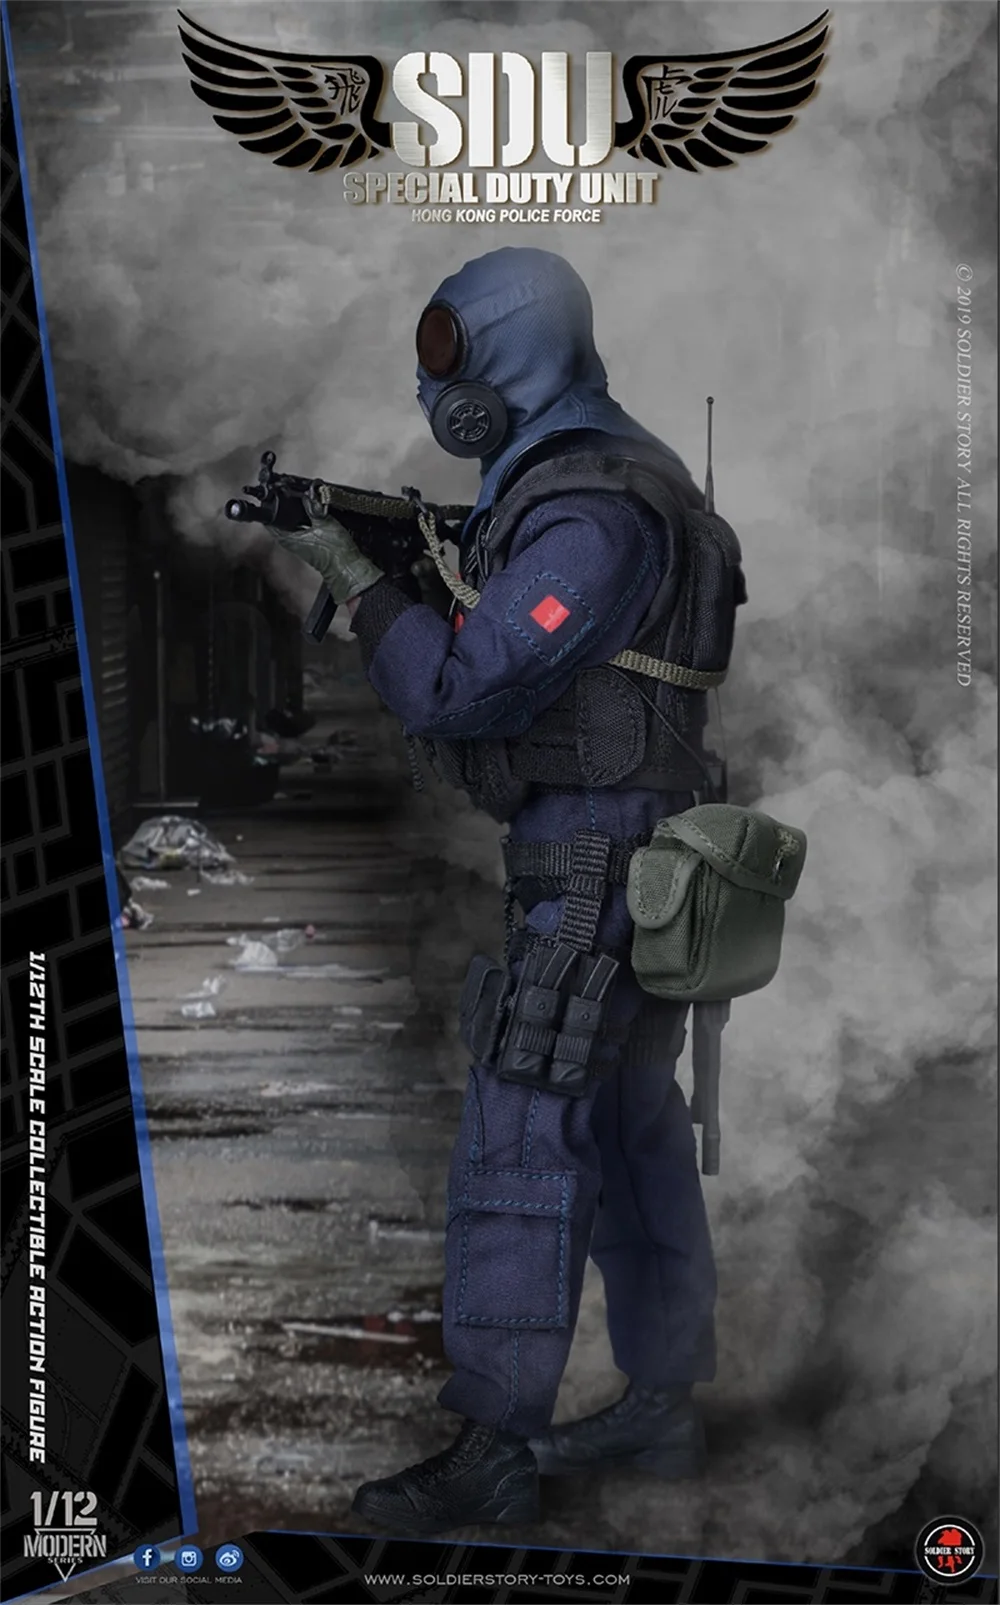 

SoldierStory 1/12th SSM002 Special Duty Unit Hong Kong Police Force Assault Team Collectible Action Figure